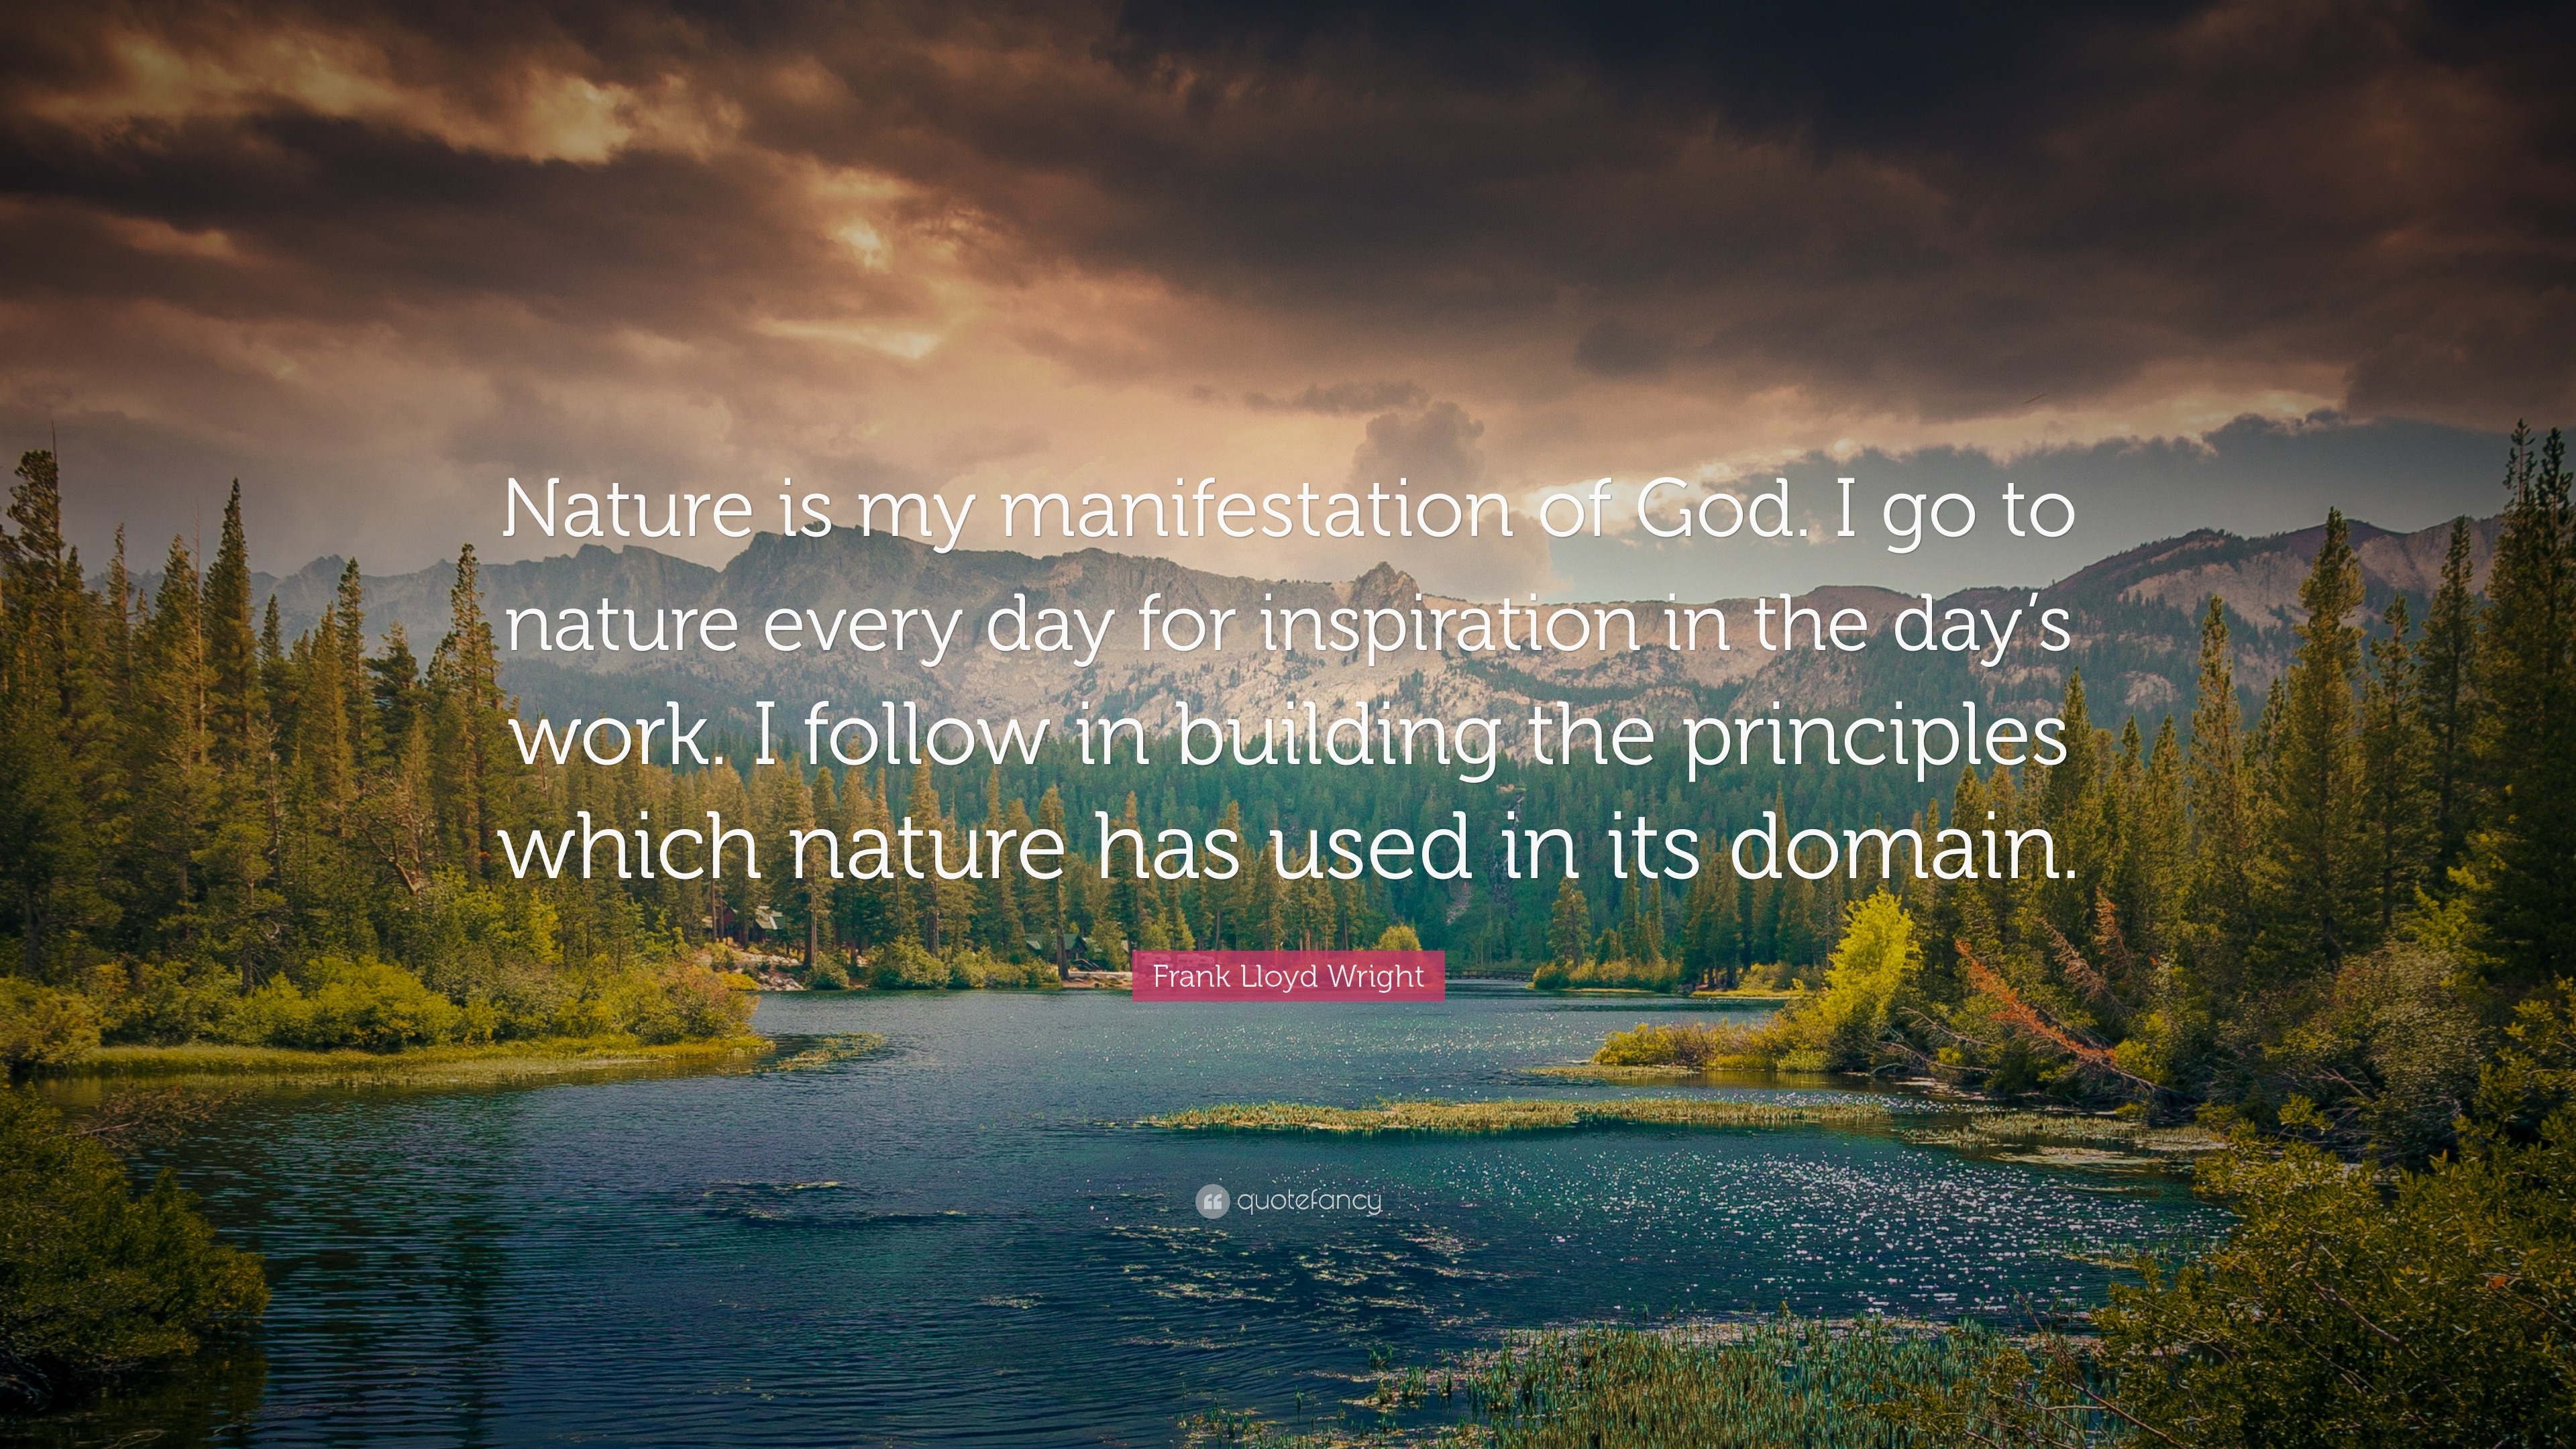 Frank Lloyd Wright “Nature is my manifestation of God. go nature every day for inspiration in the day's work. follow in building the ...”